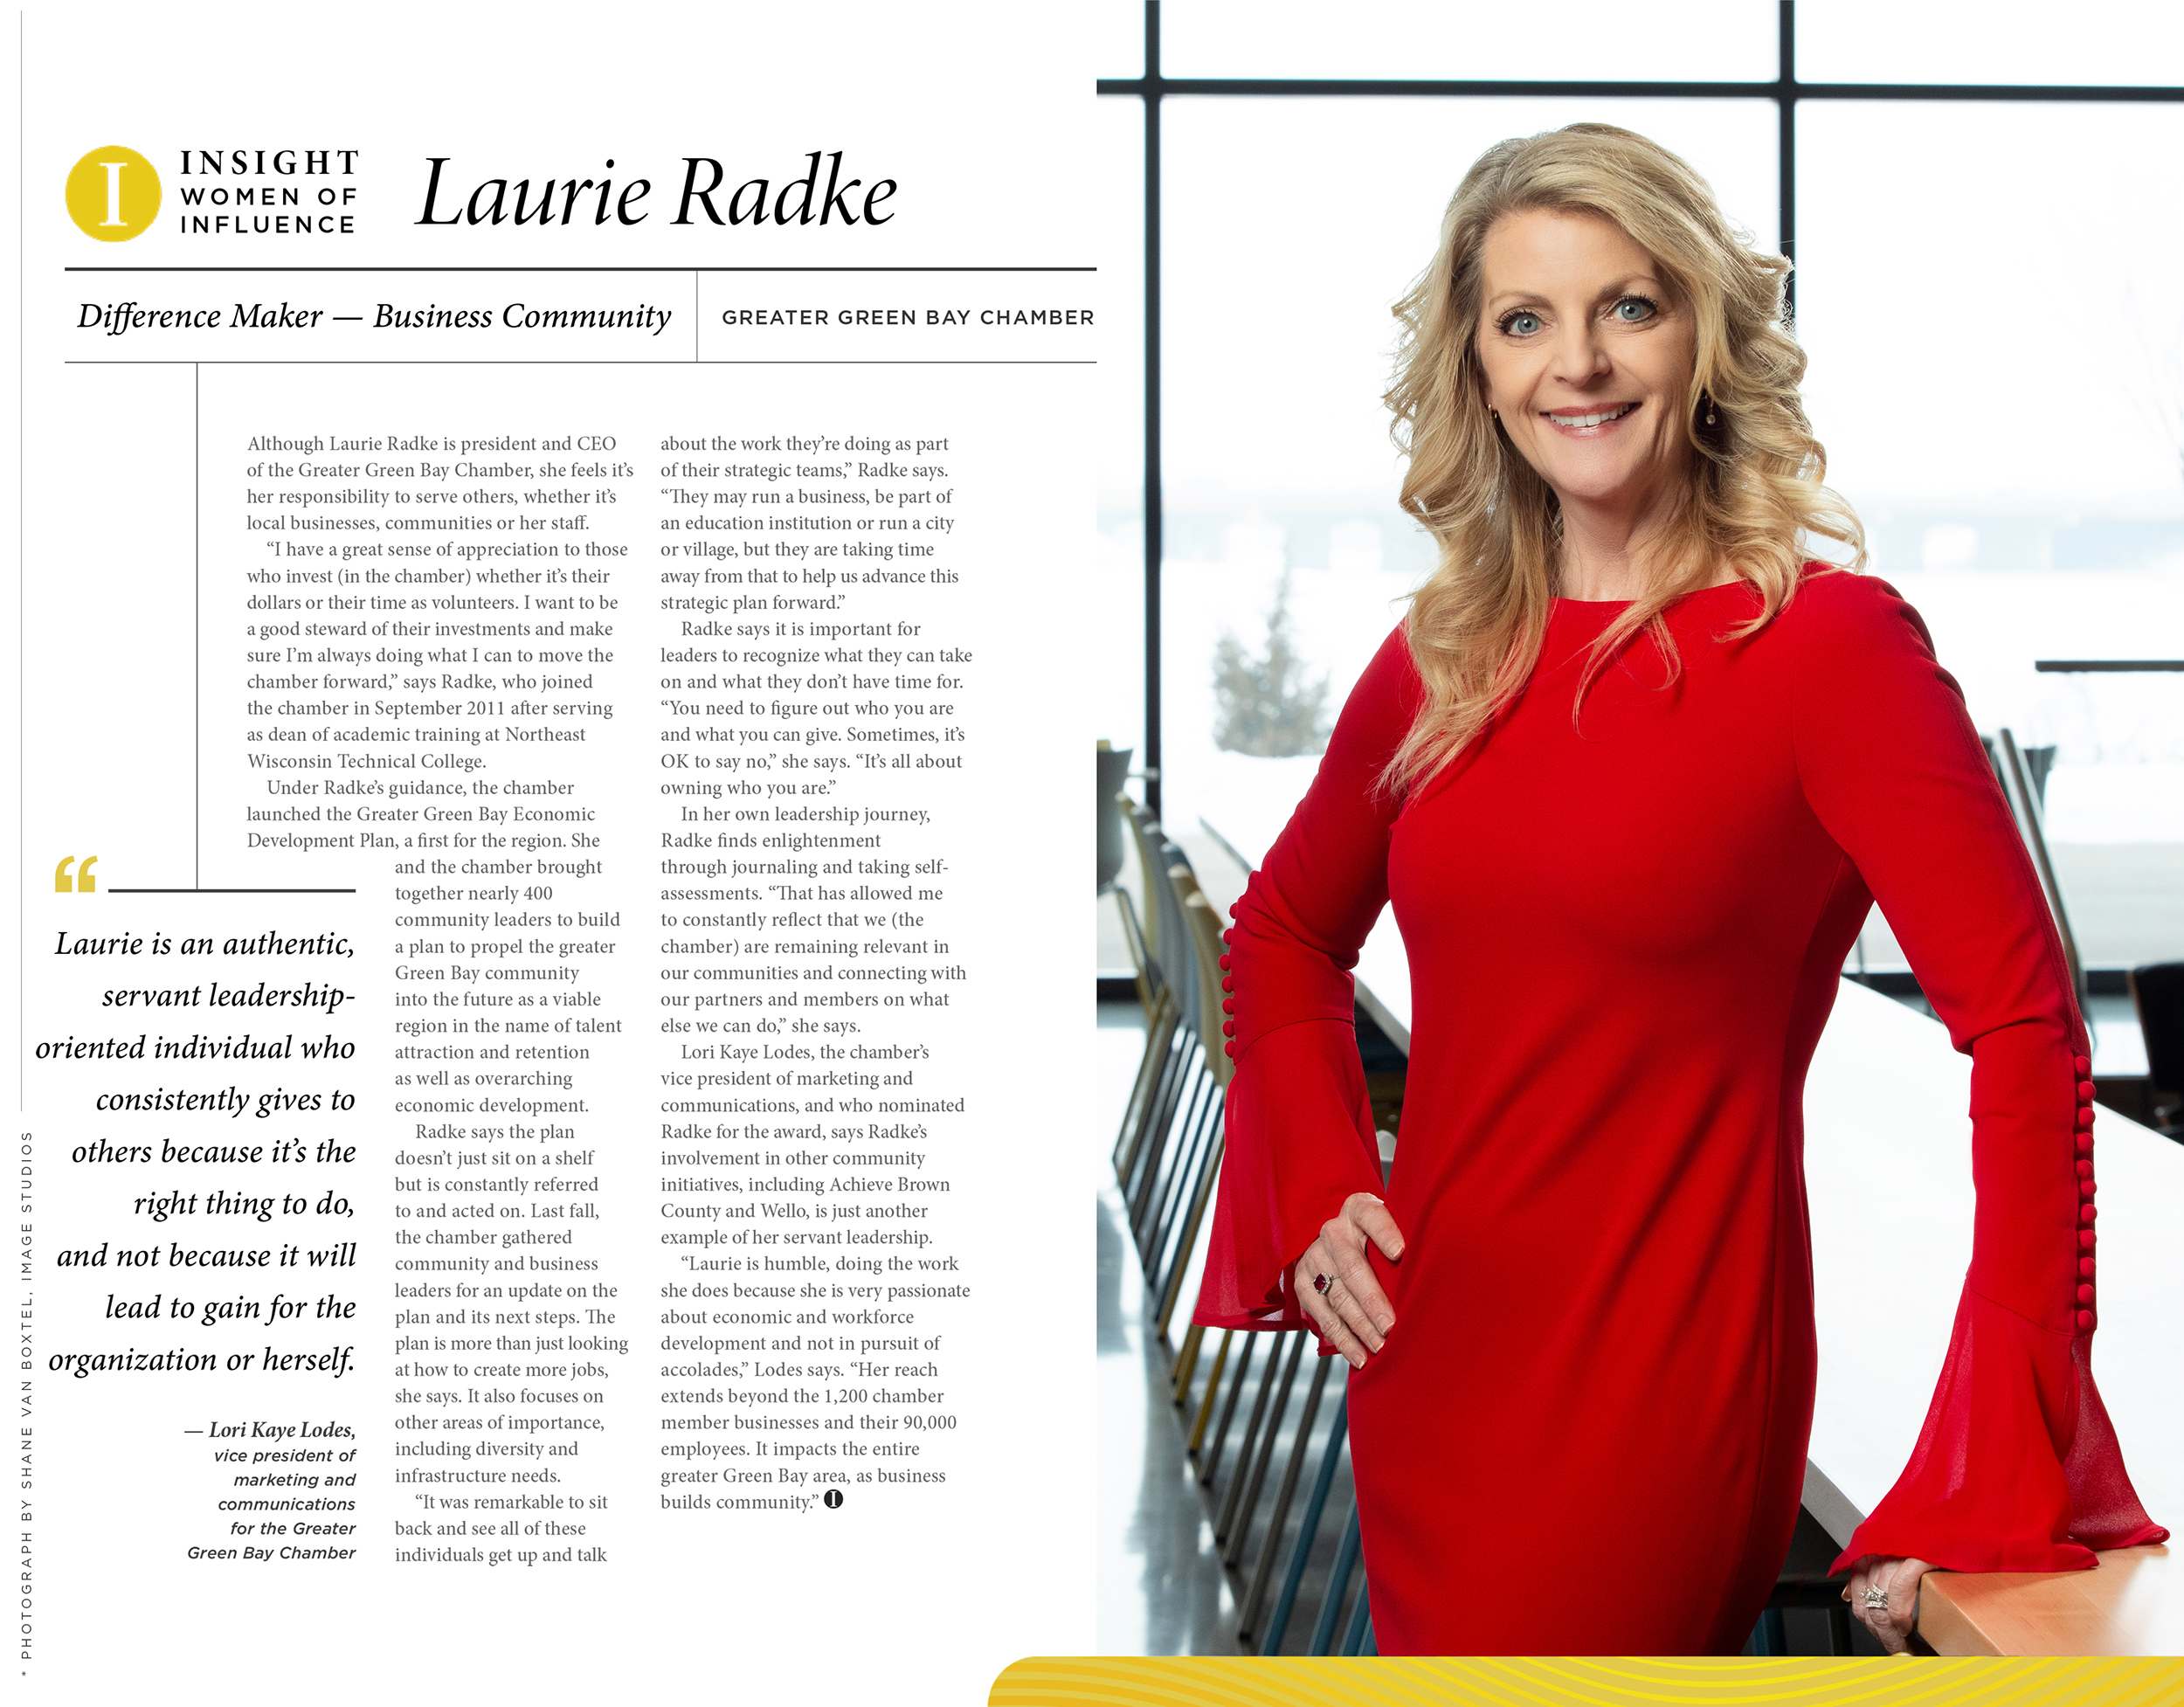 Editorial Photography for feature story of Laurie Radke for Insight Women of Influence Awards